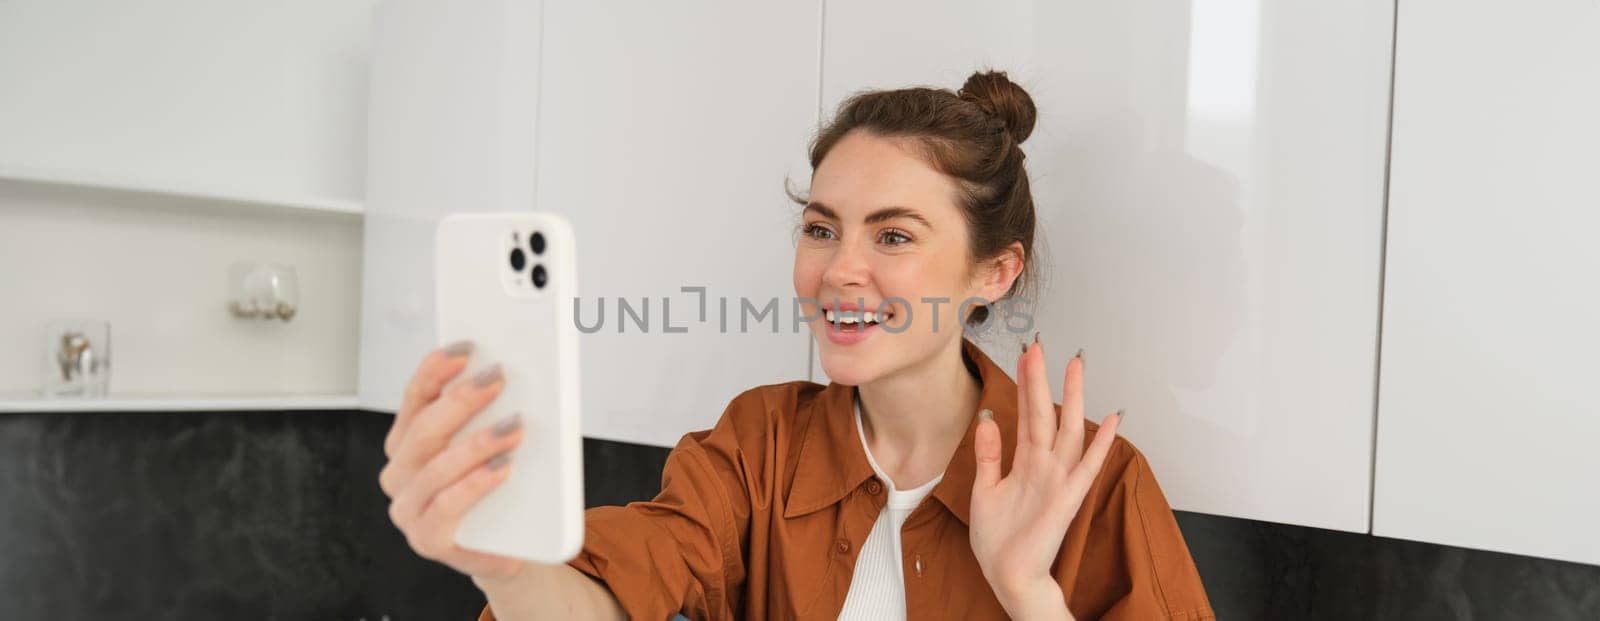 Portrait of young cheerful woman laughing and smiling during phone call, video chats with friend, sits on kitchen counter and talks to someone using smartphone app.